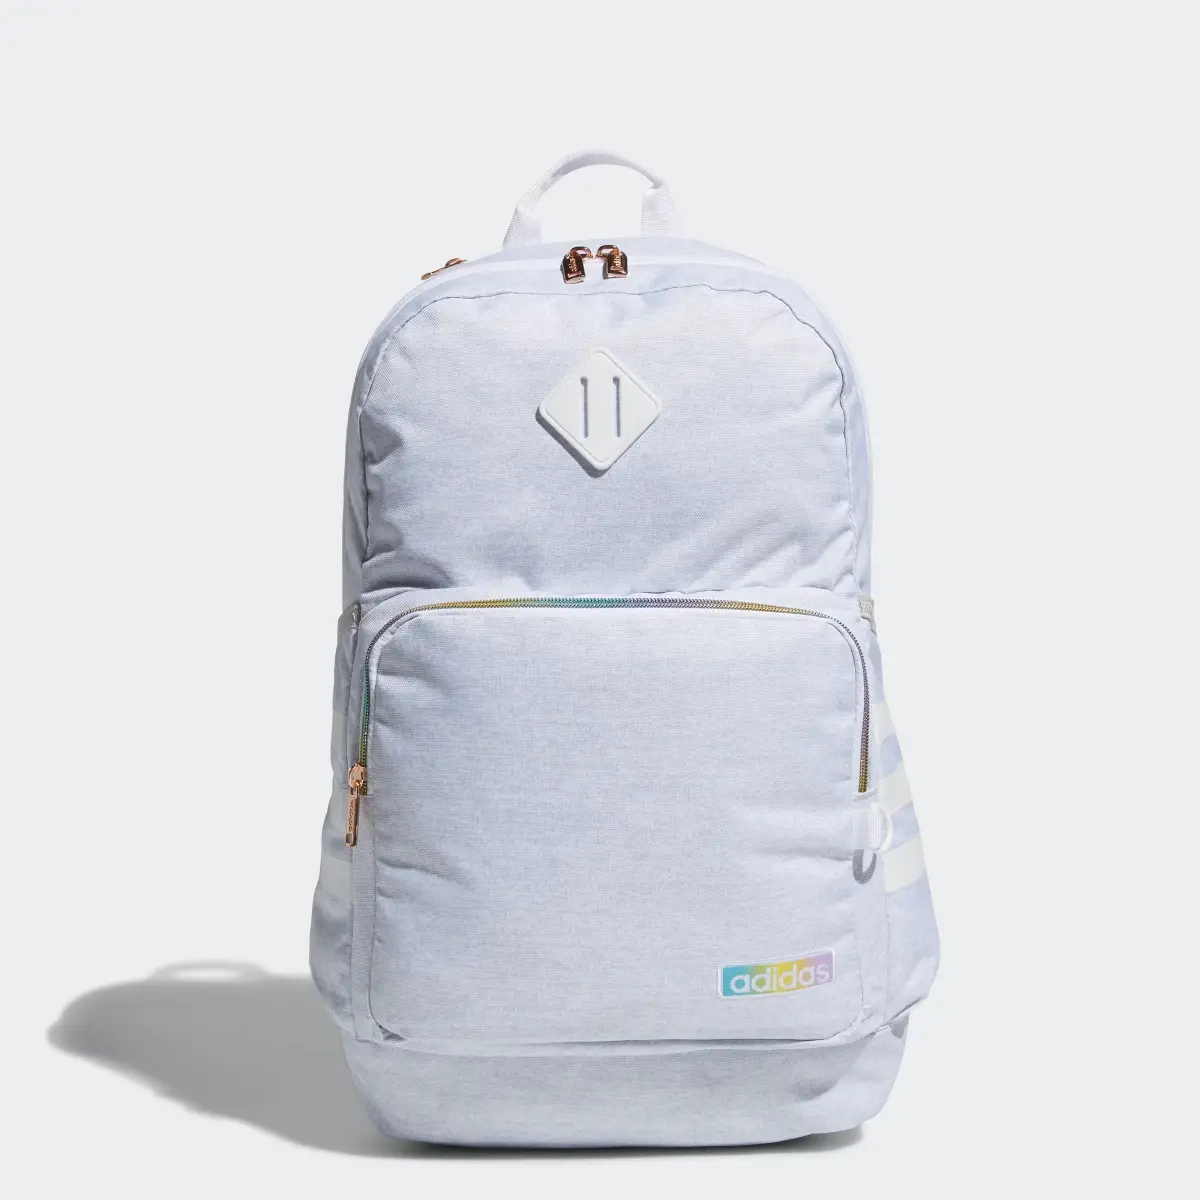 Adidas Classic 3-Stripes Backpack. 1